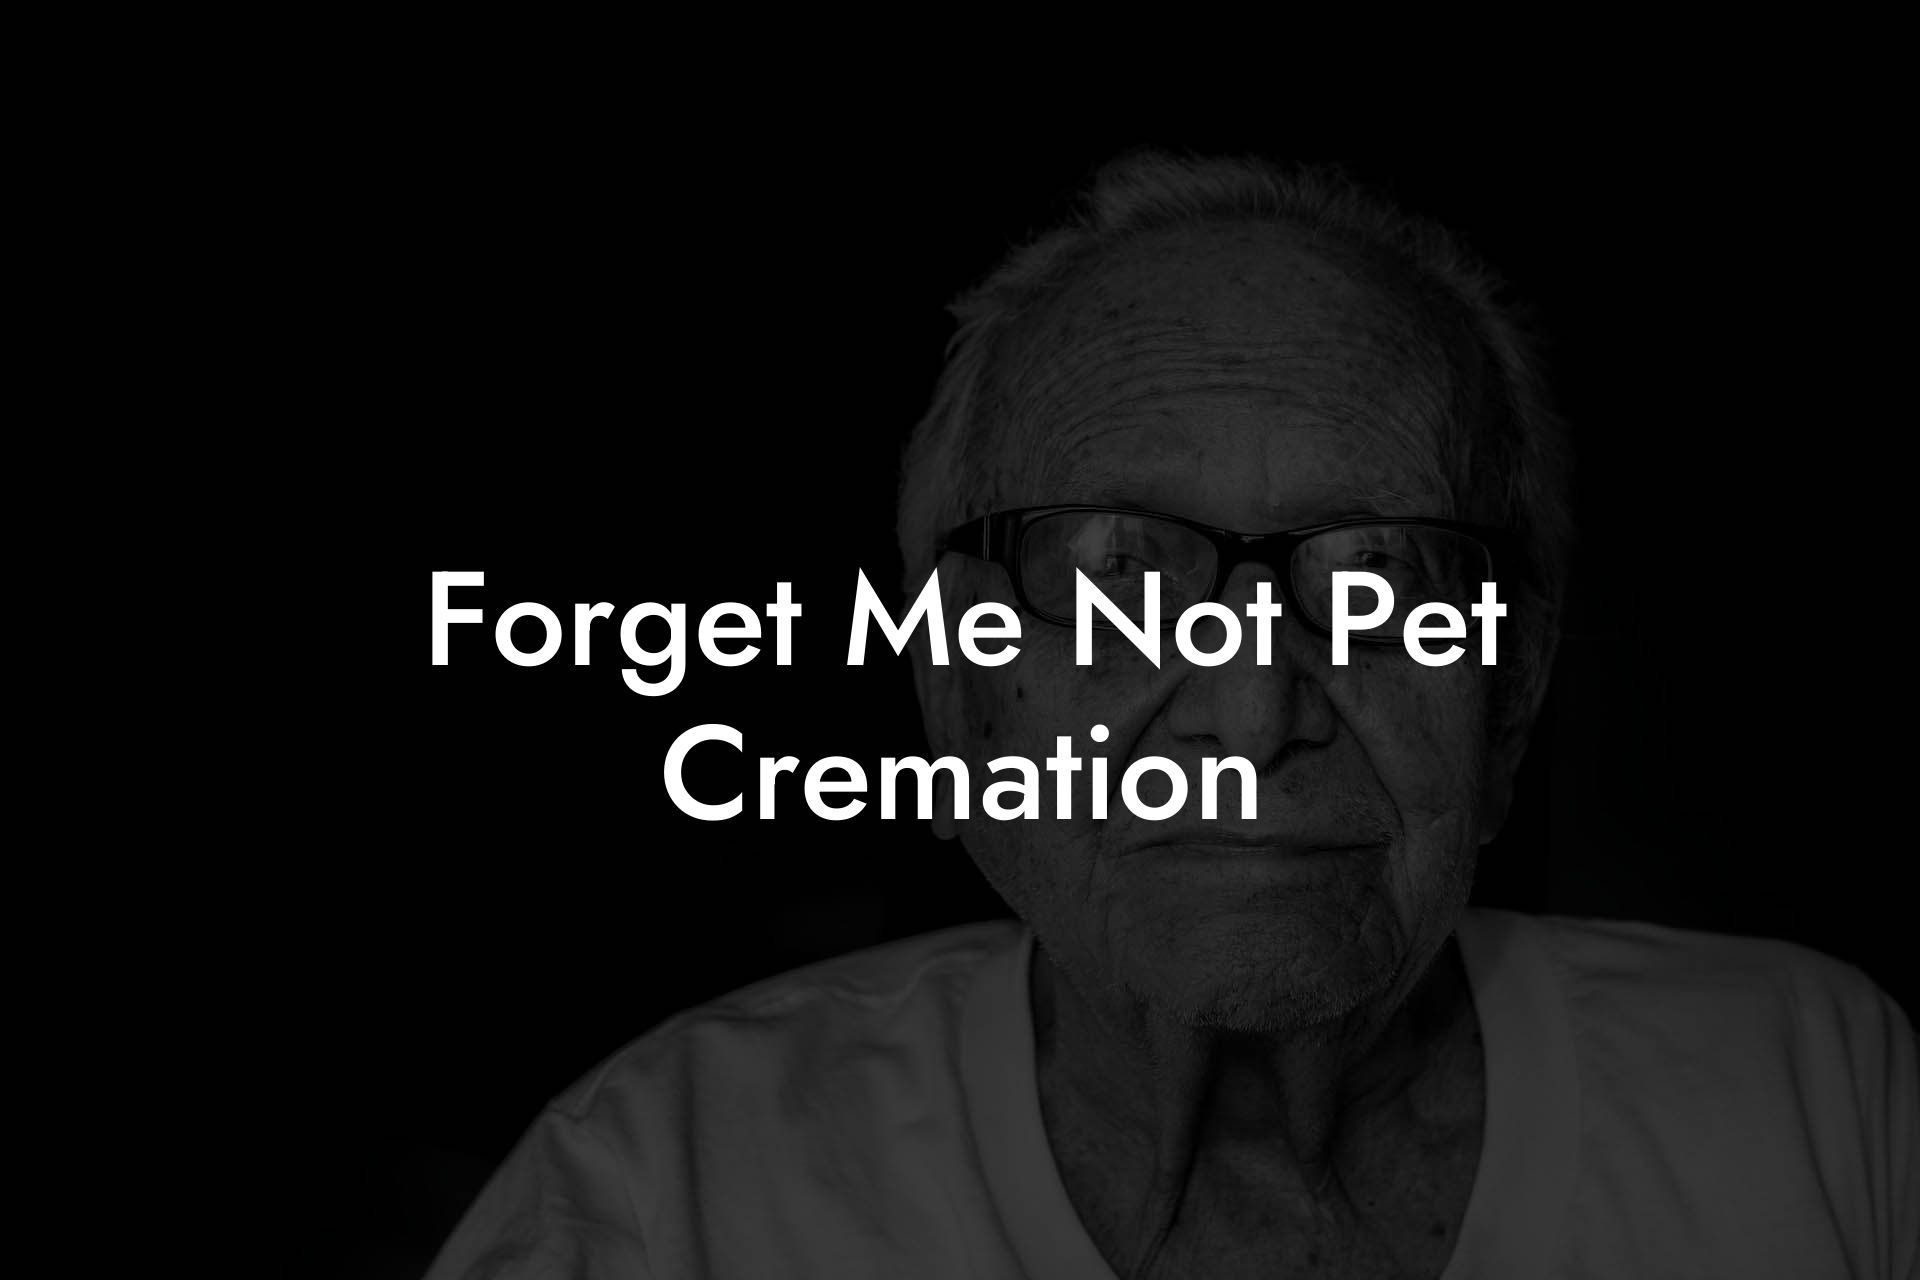 Forget Me Not Pet Cremation